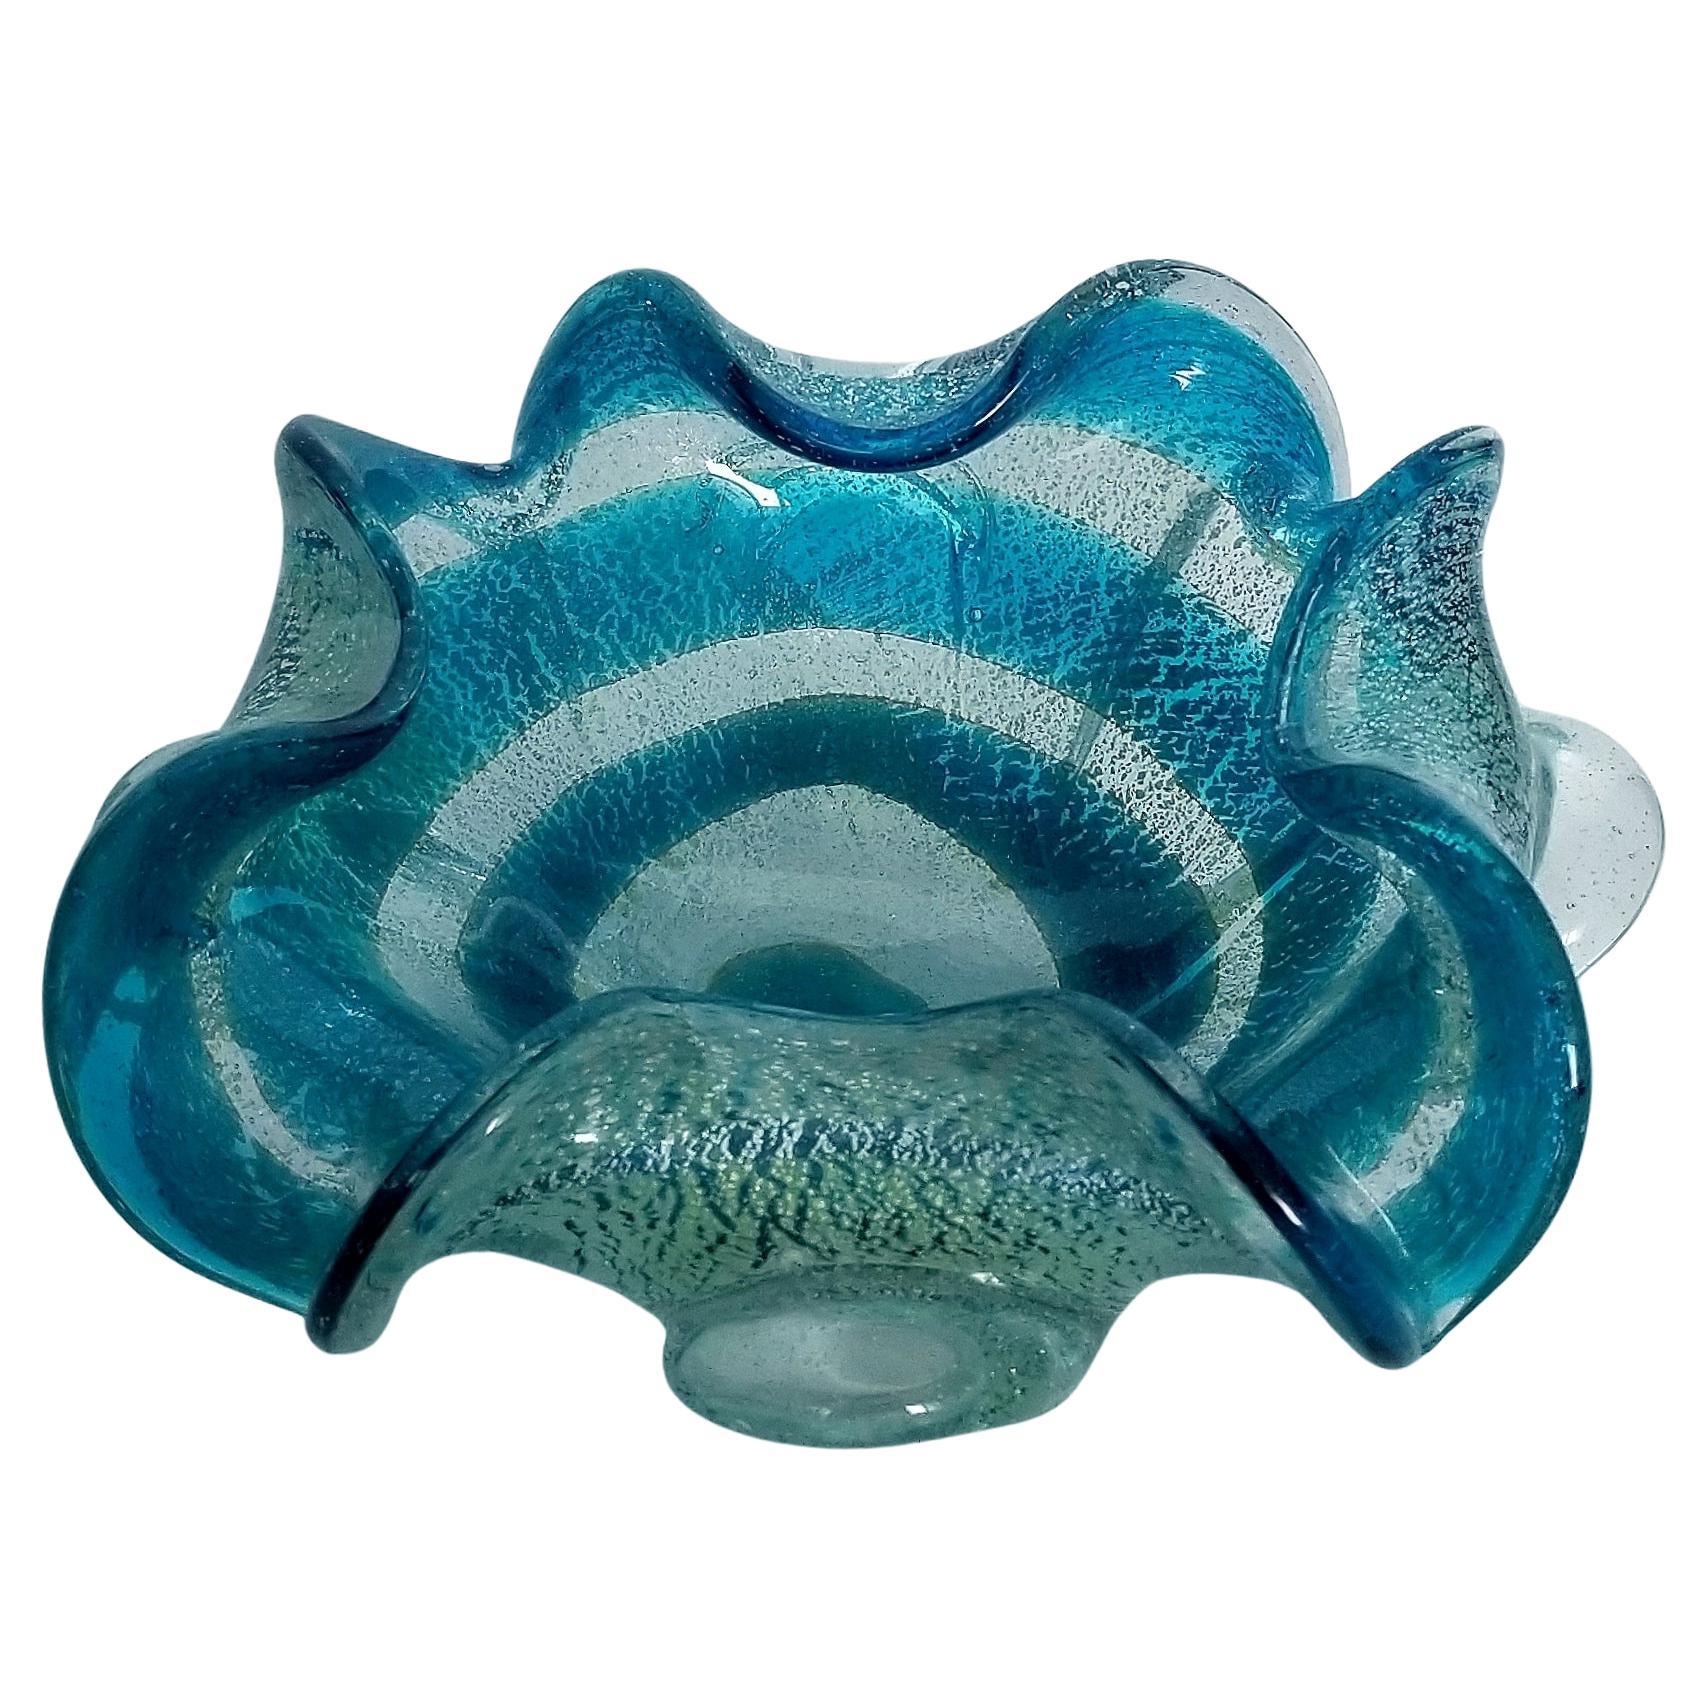 Blue and Silver Murano Glass Ashtray or Catch-all Bowl For Sale 3